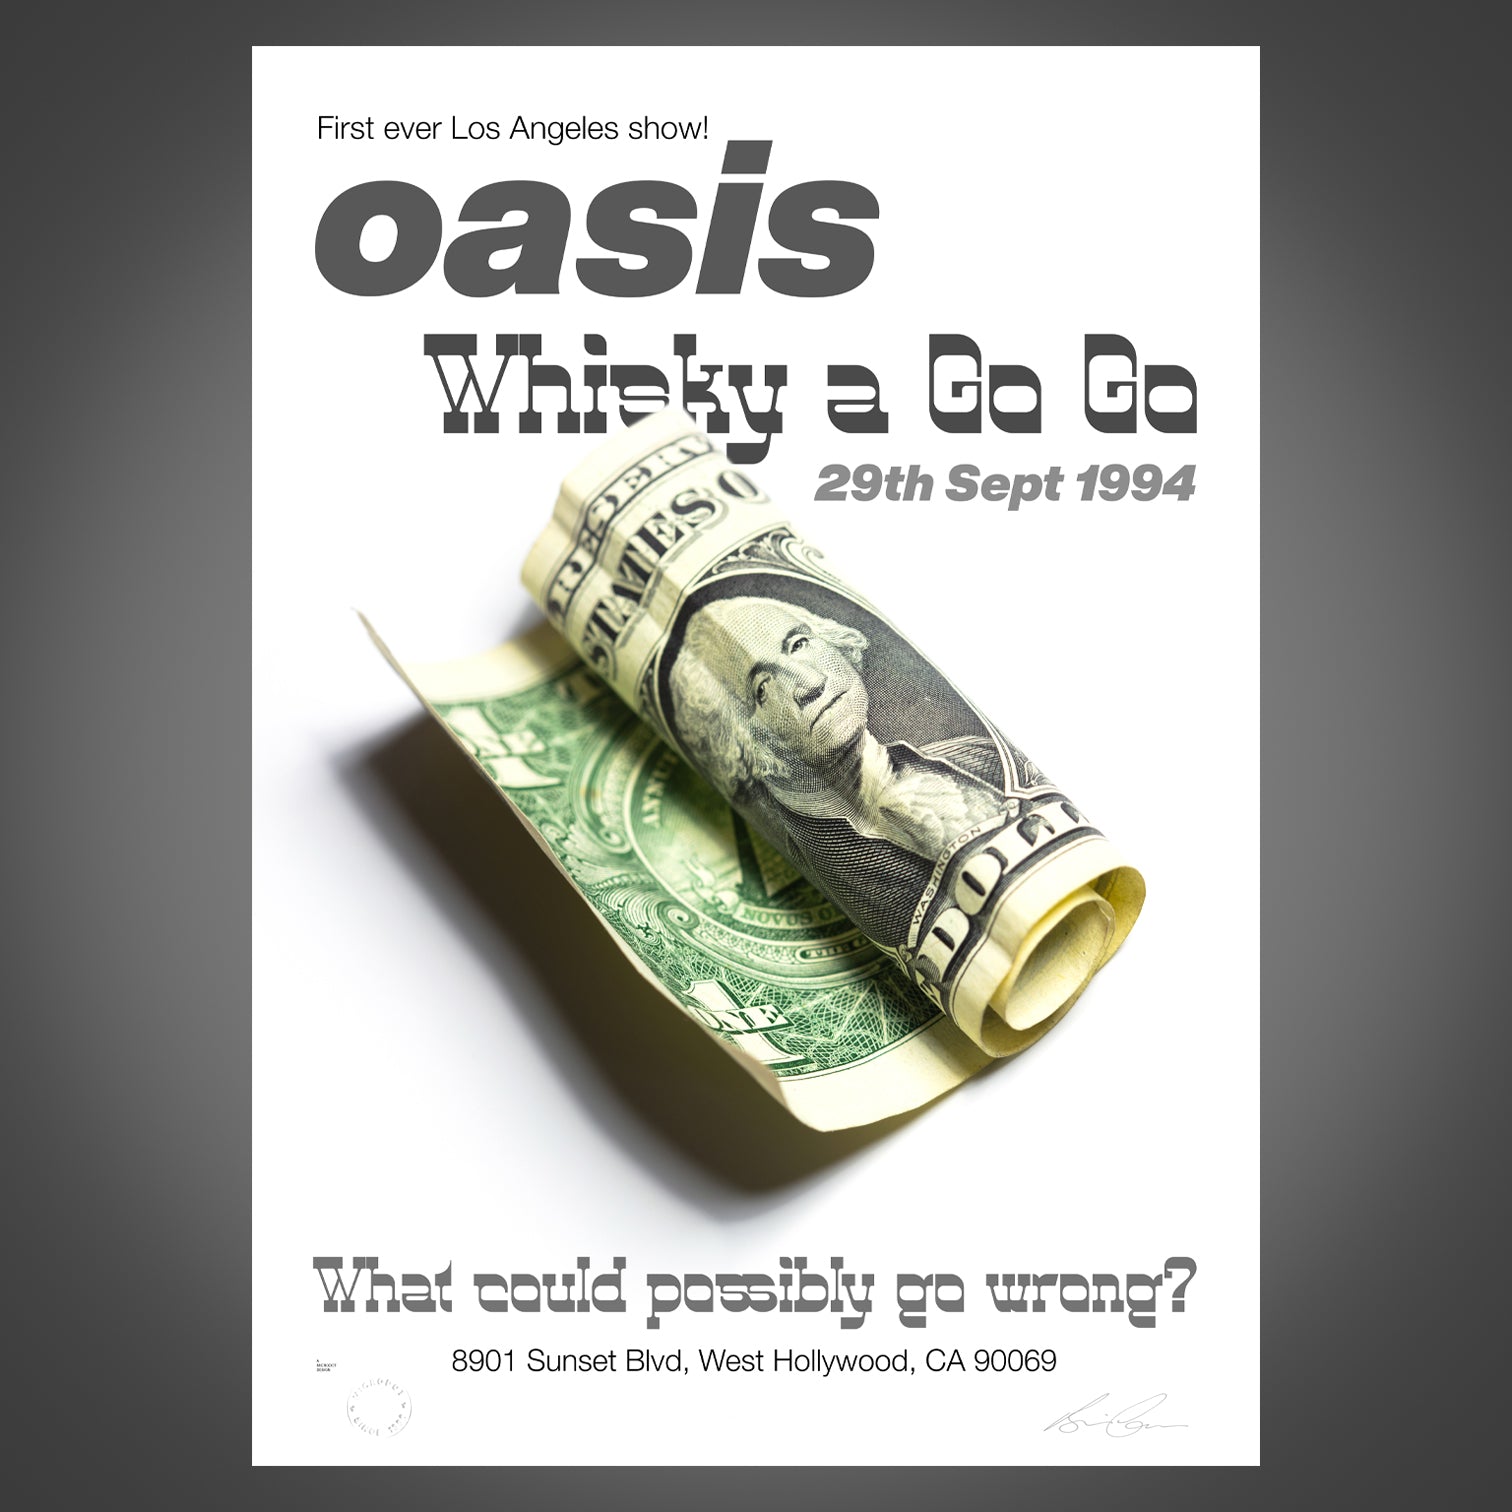 Oasis - Live At The Whisky a Go Go - Gig Poster - New Item